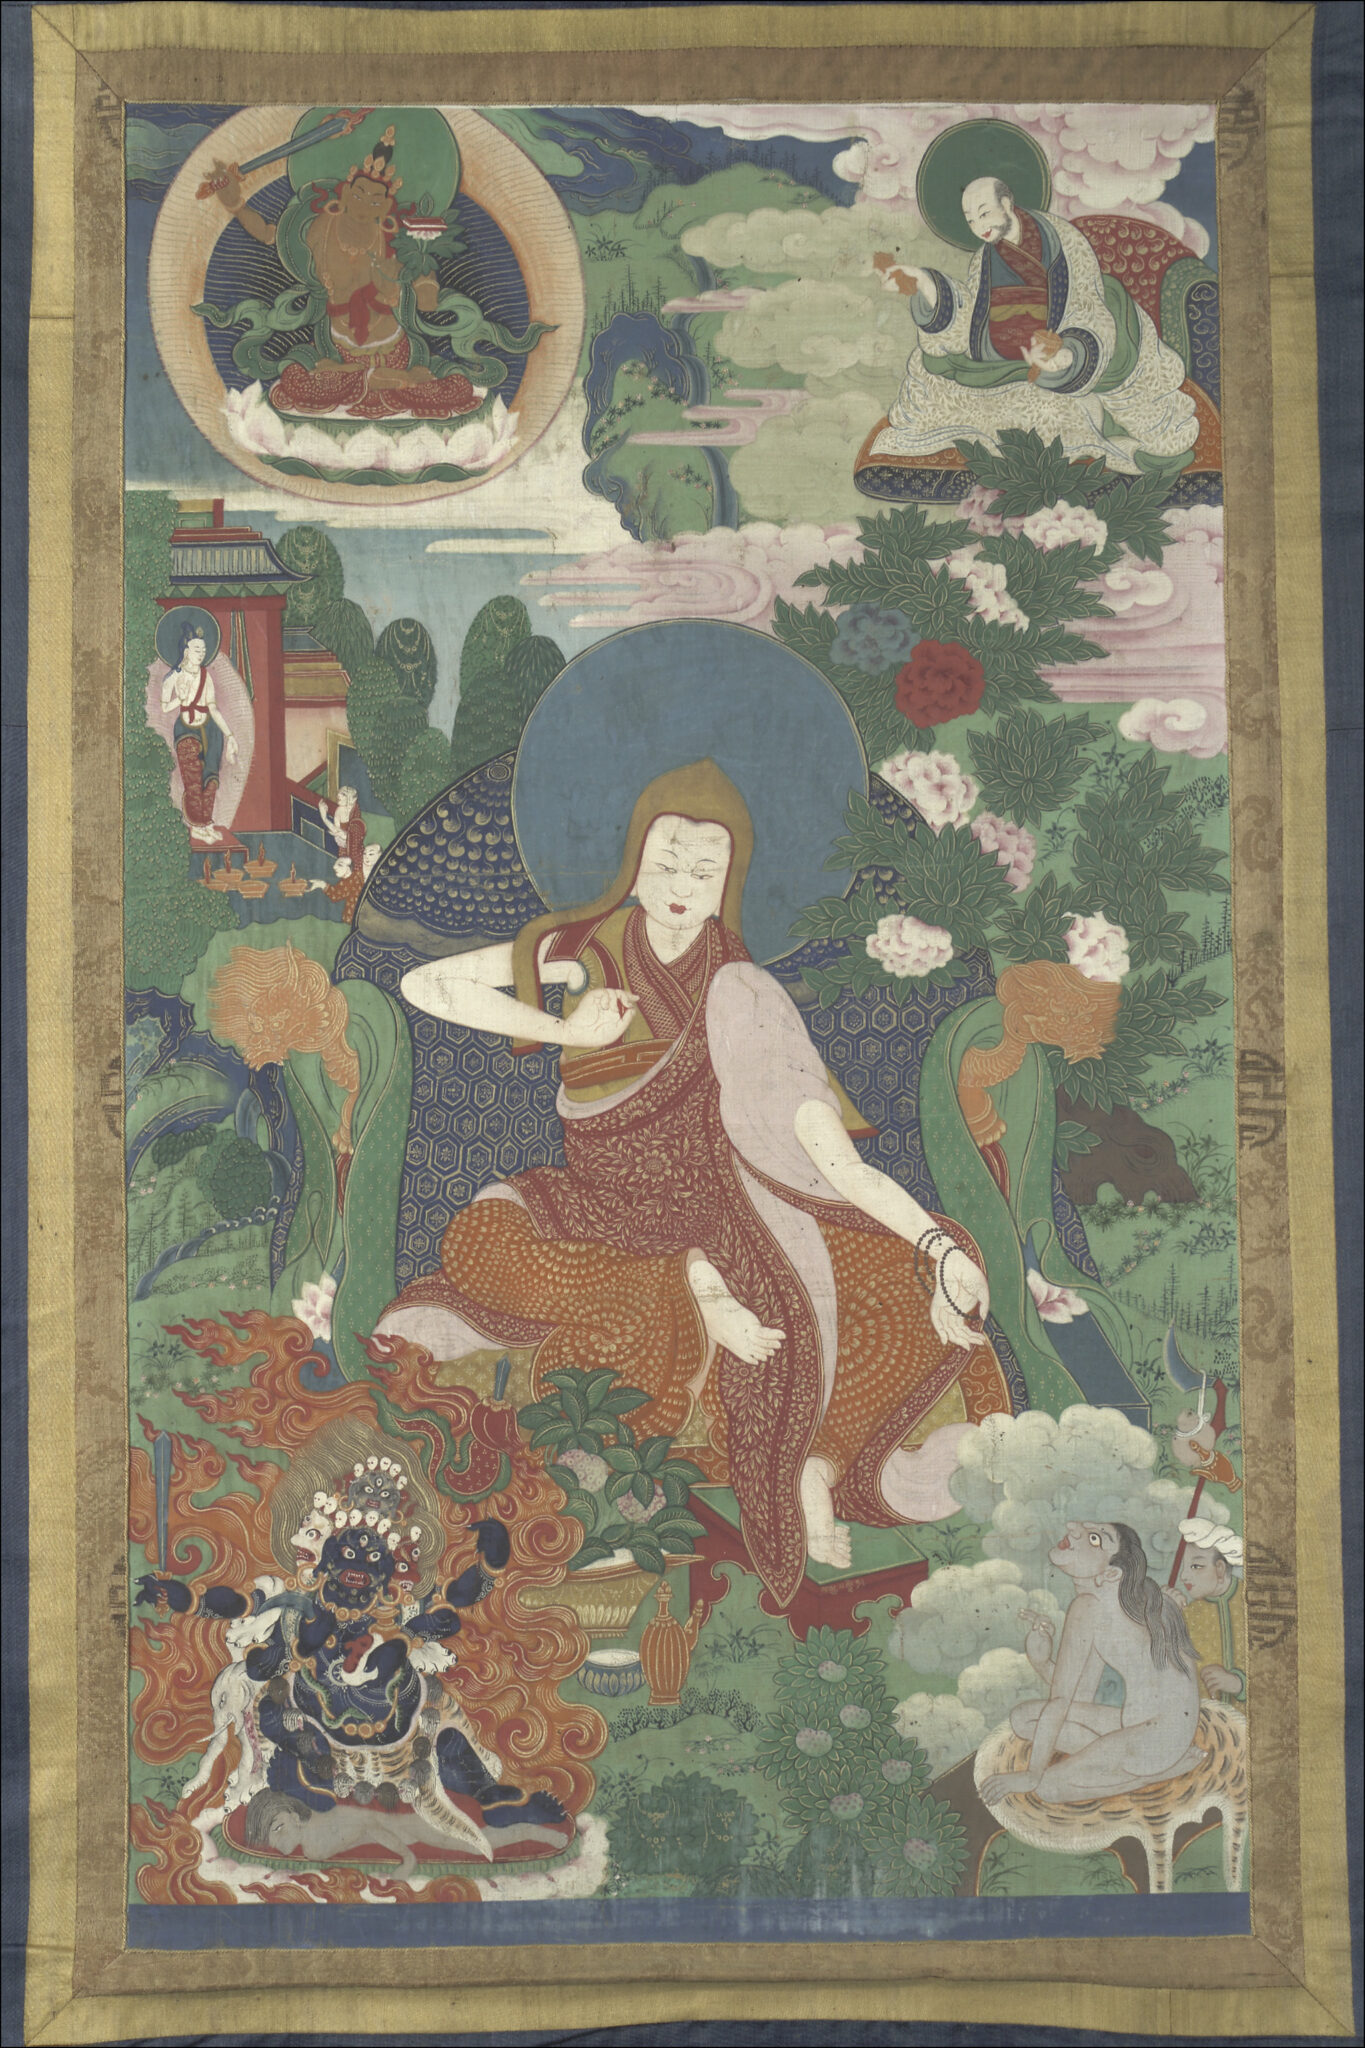 Monk seated on blue throne extends right hand to grey-skinned figure at bottom right